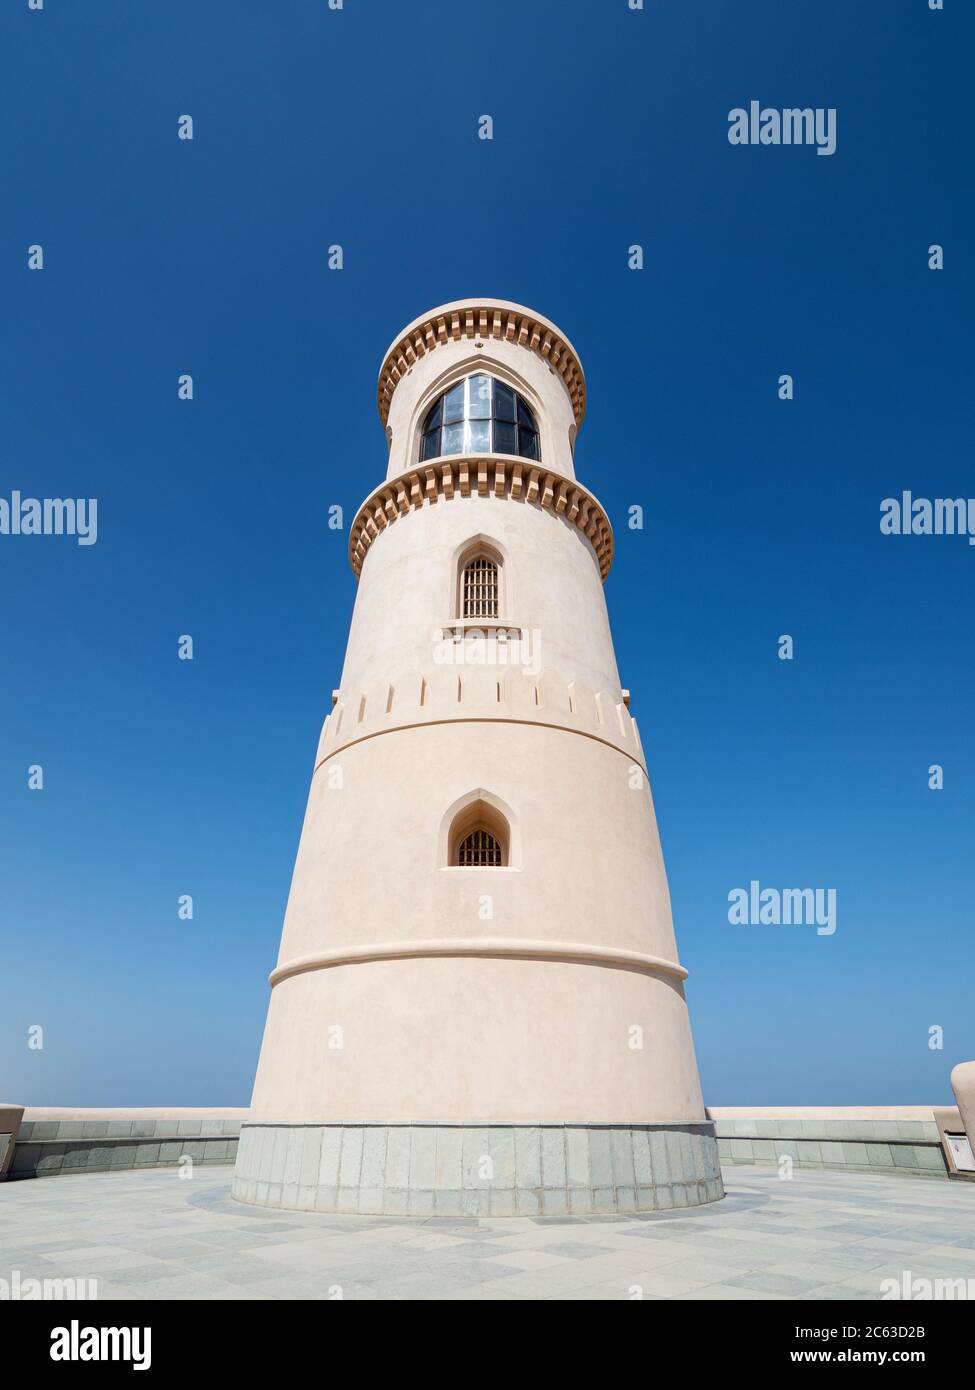 Lighthouse in the harbor city of Sur, Sultanate of Oman. Stock Photo